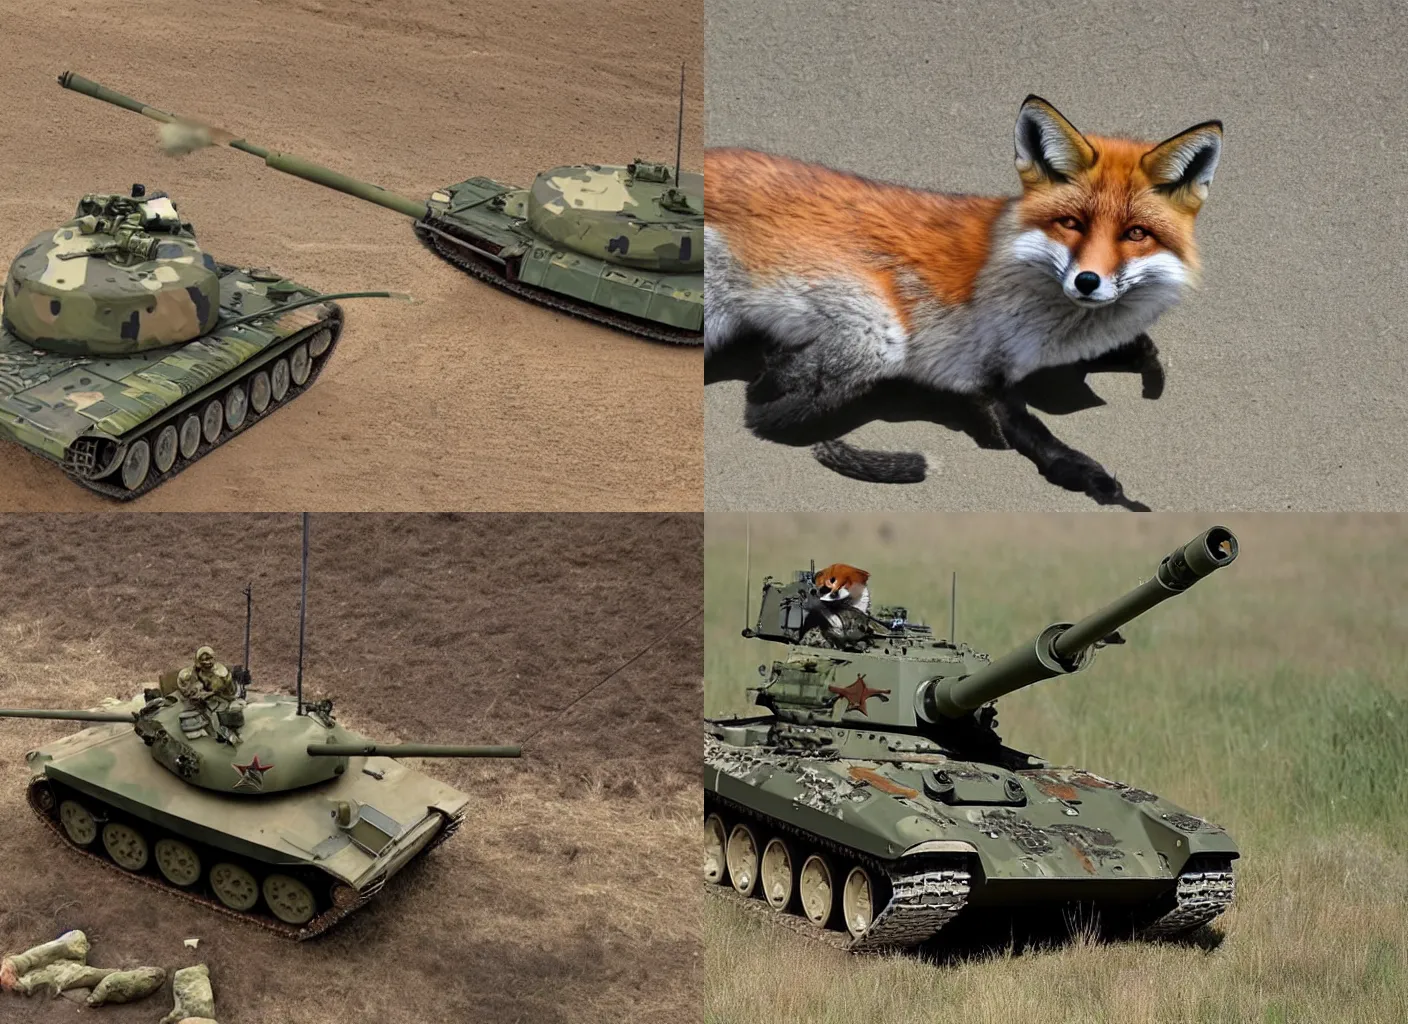 Prompt: by military, fox becomes tank